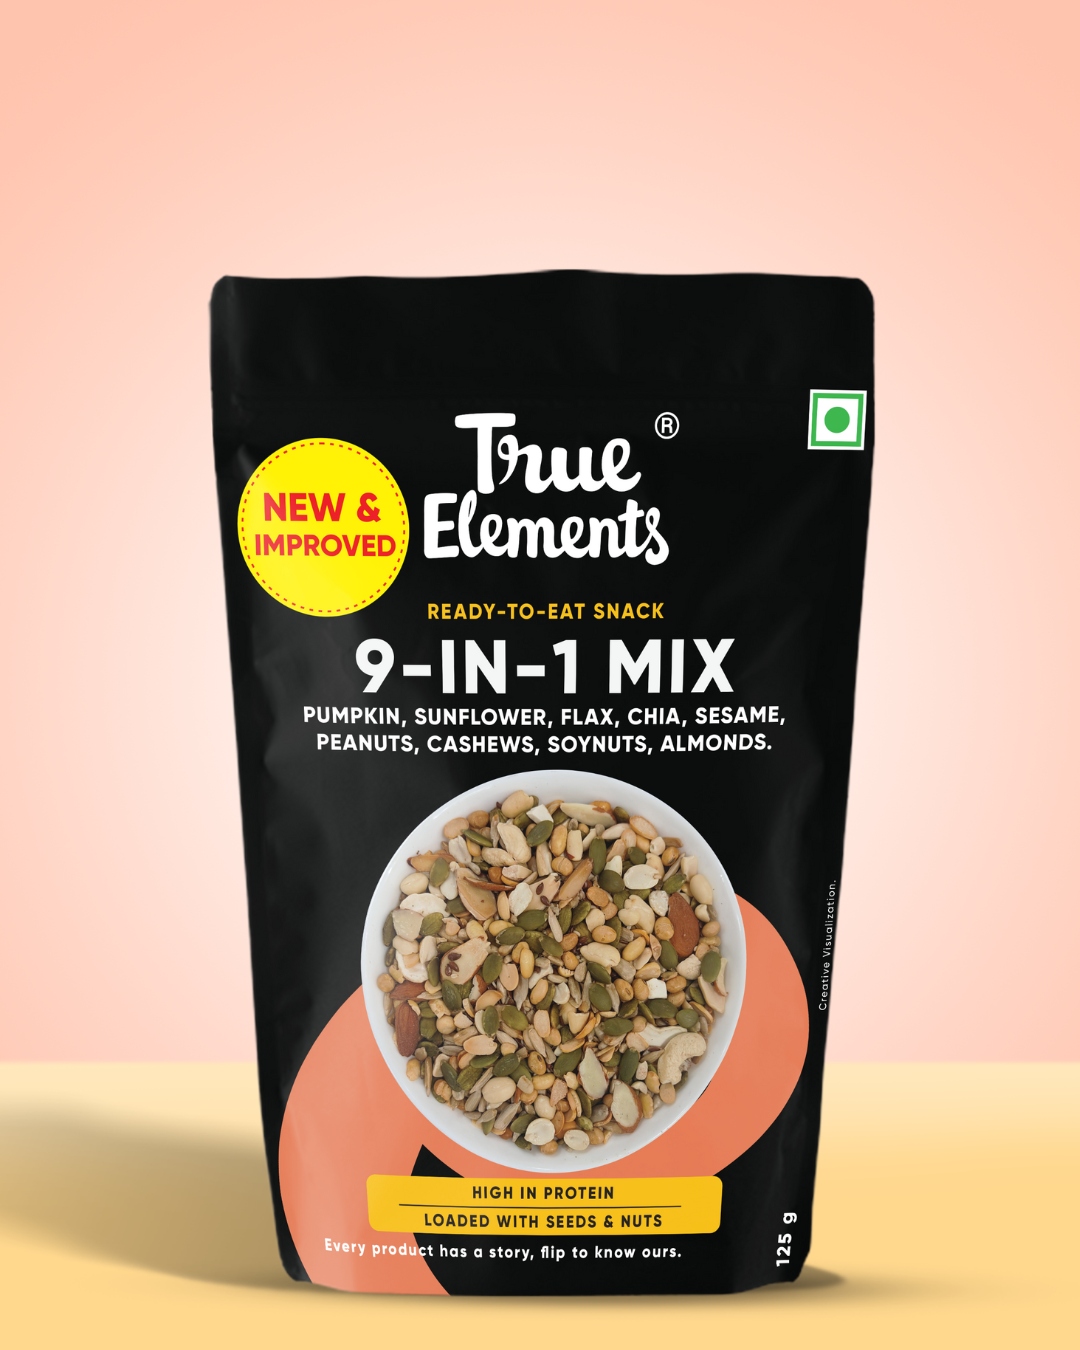 True Elements 9 in 1 Snack Mix Image